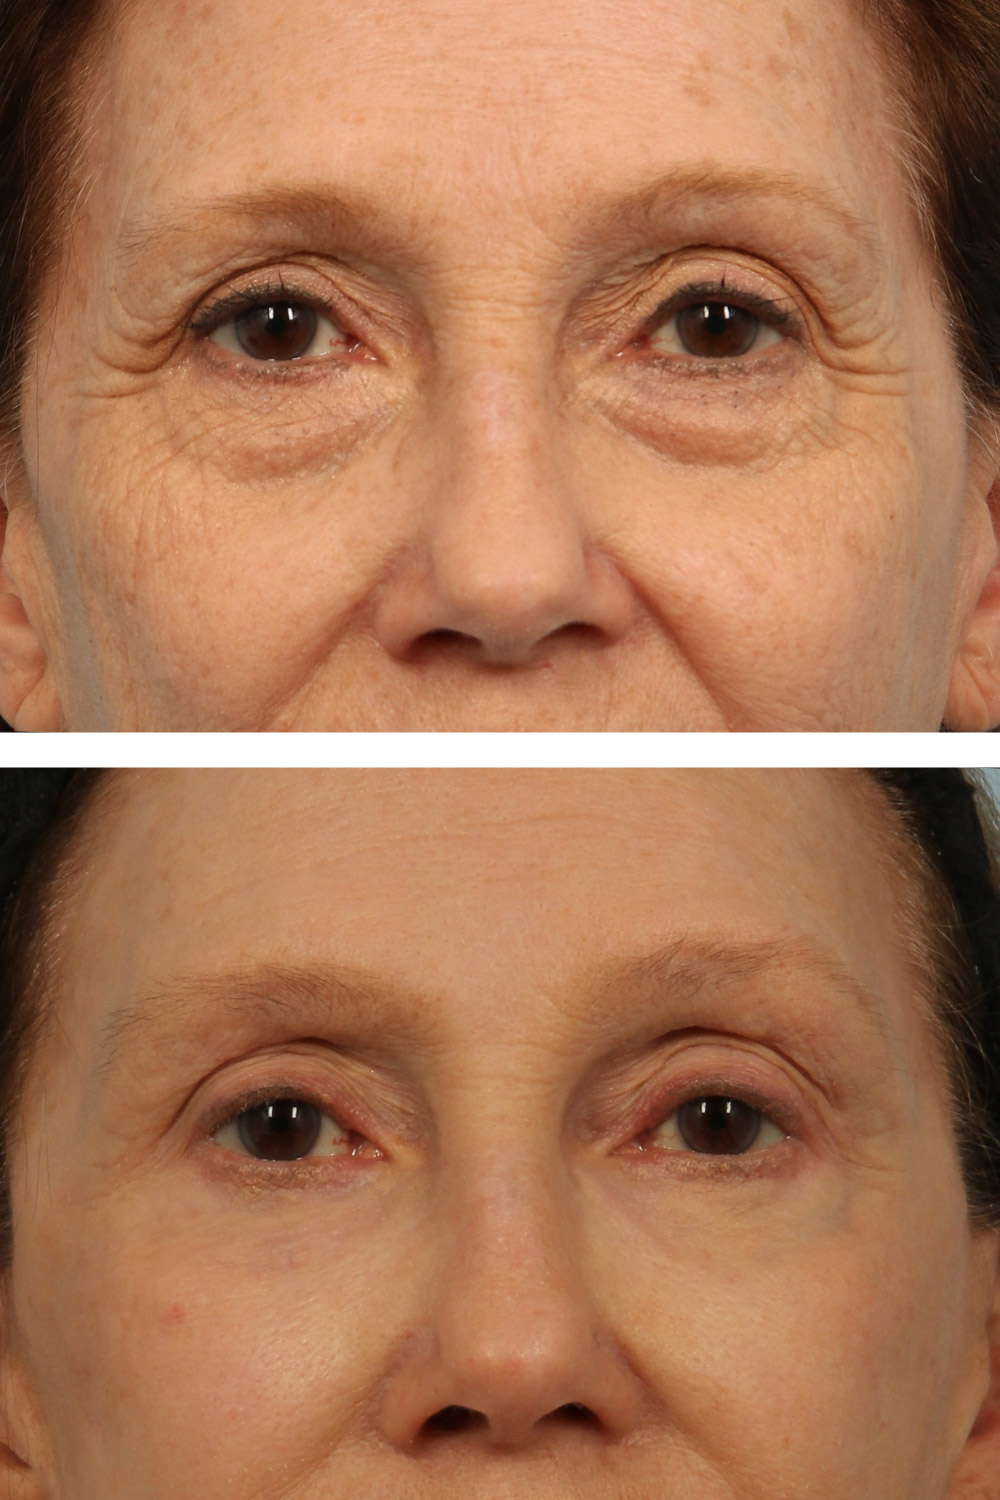 Lower and upper blepharoplasty (eyelid surgery) and laser resurfacing on a 60-year-old woman